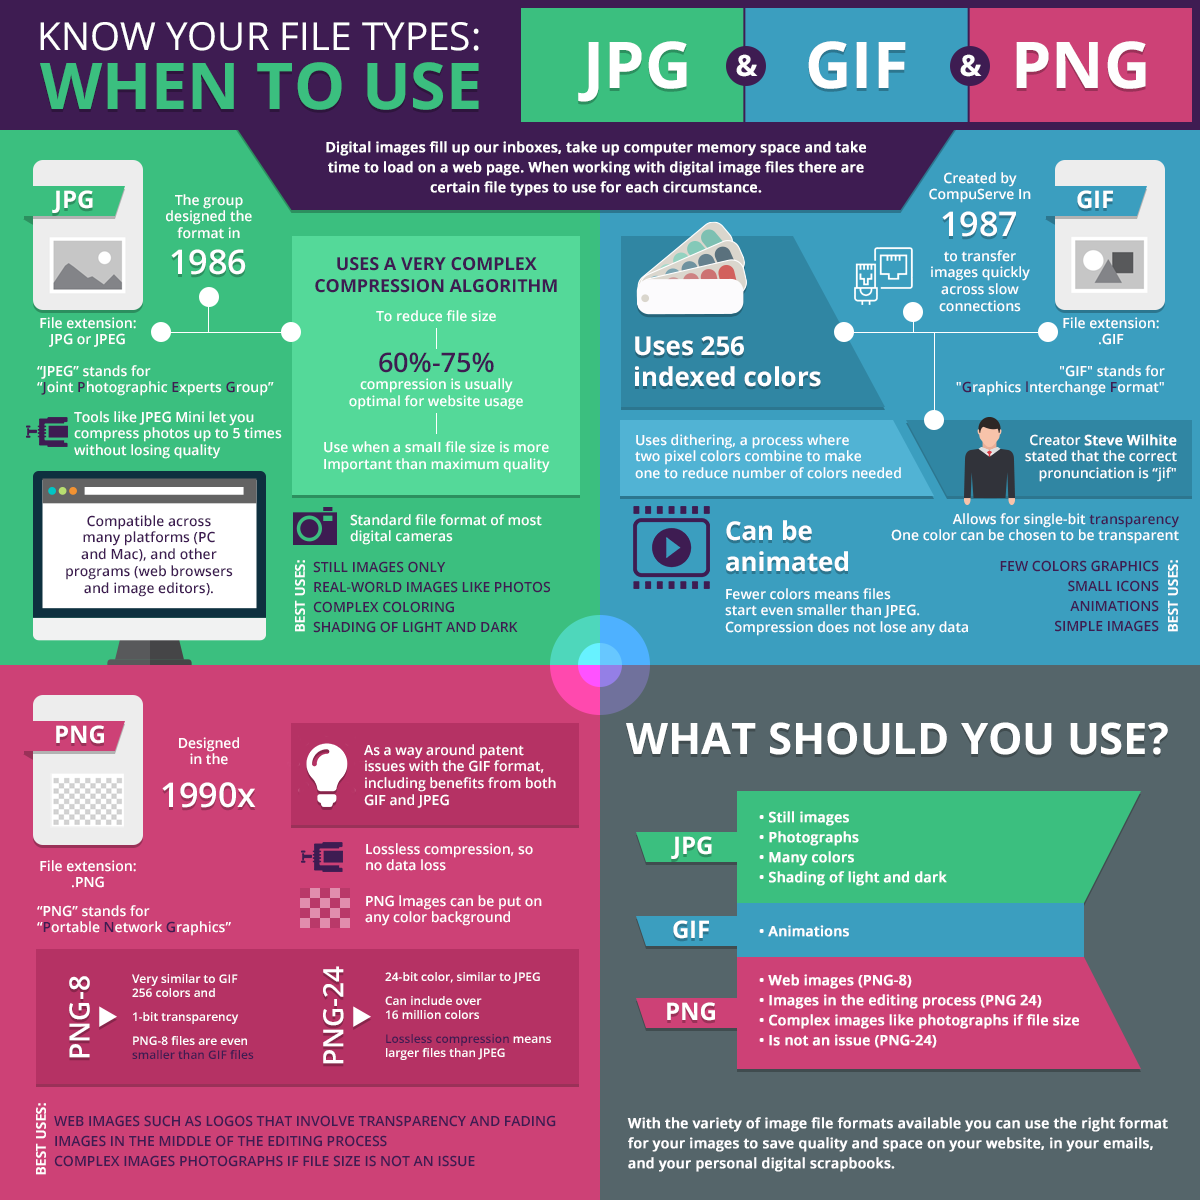 Know Your File Types: Using JPG, GIF & PNG.